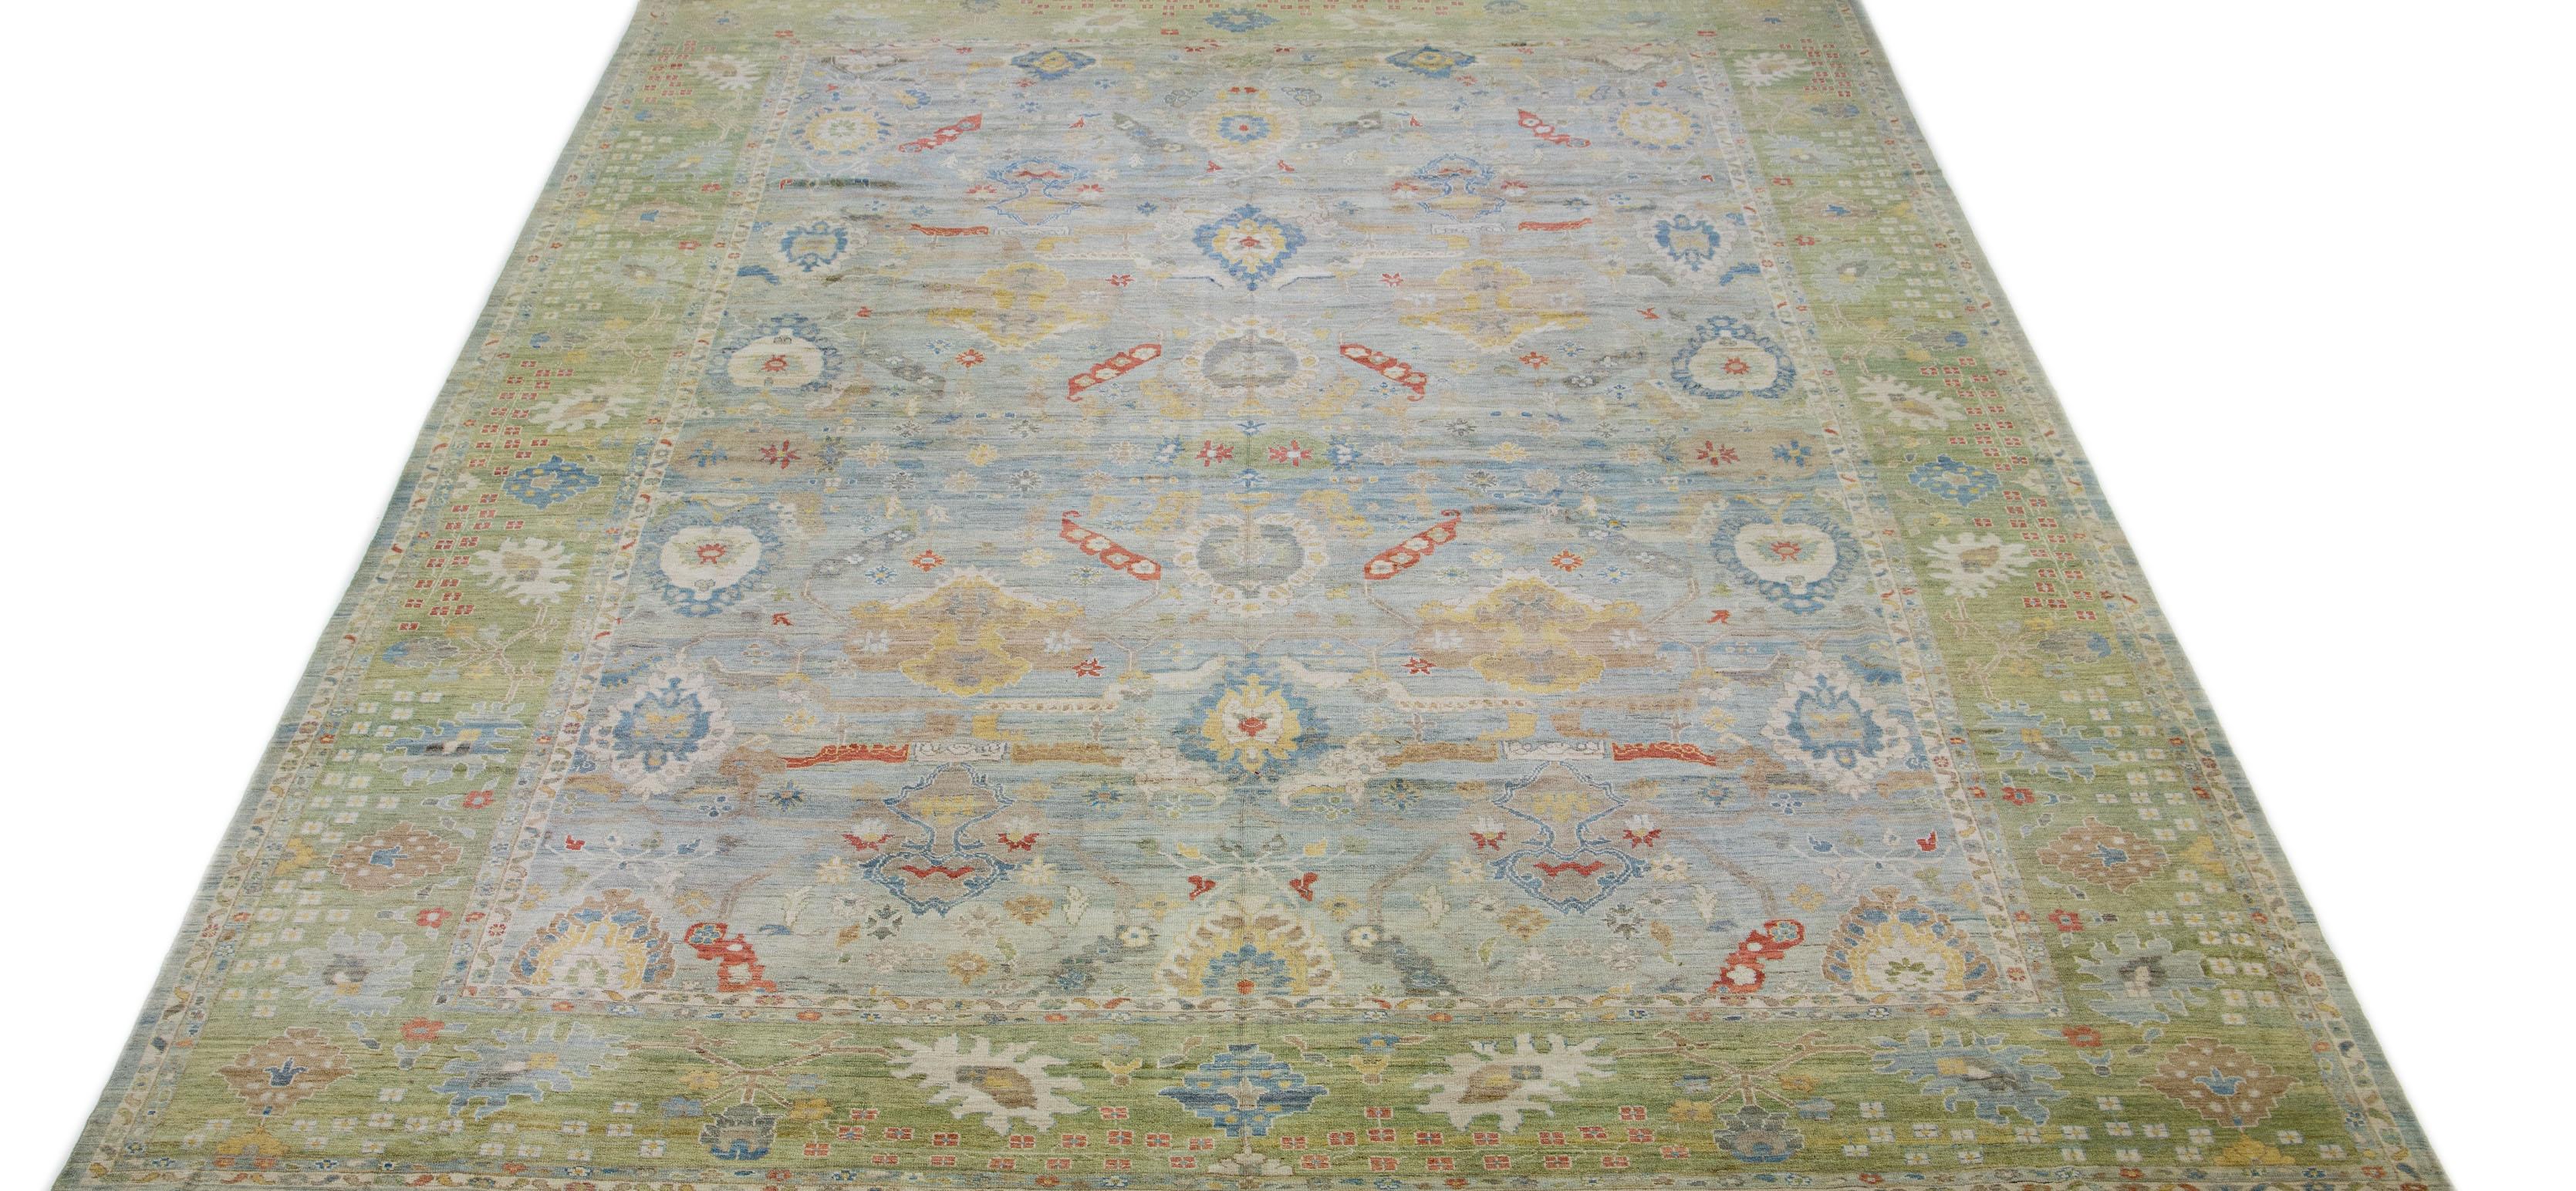 This contemporary take on the traditional Sultanabad style is showcased in an exquisite hand-knotted wool rug with a striking light blue color. An intricately designed frame accentuates its all-over floral motif, adorned with multicolored accents